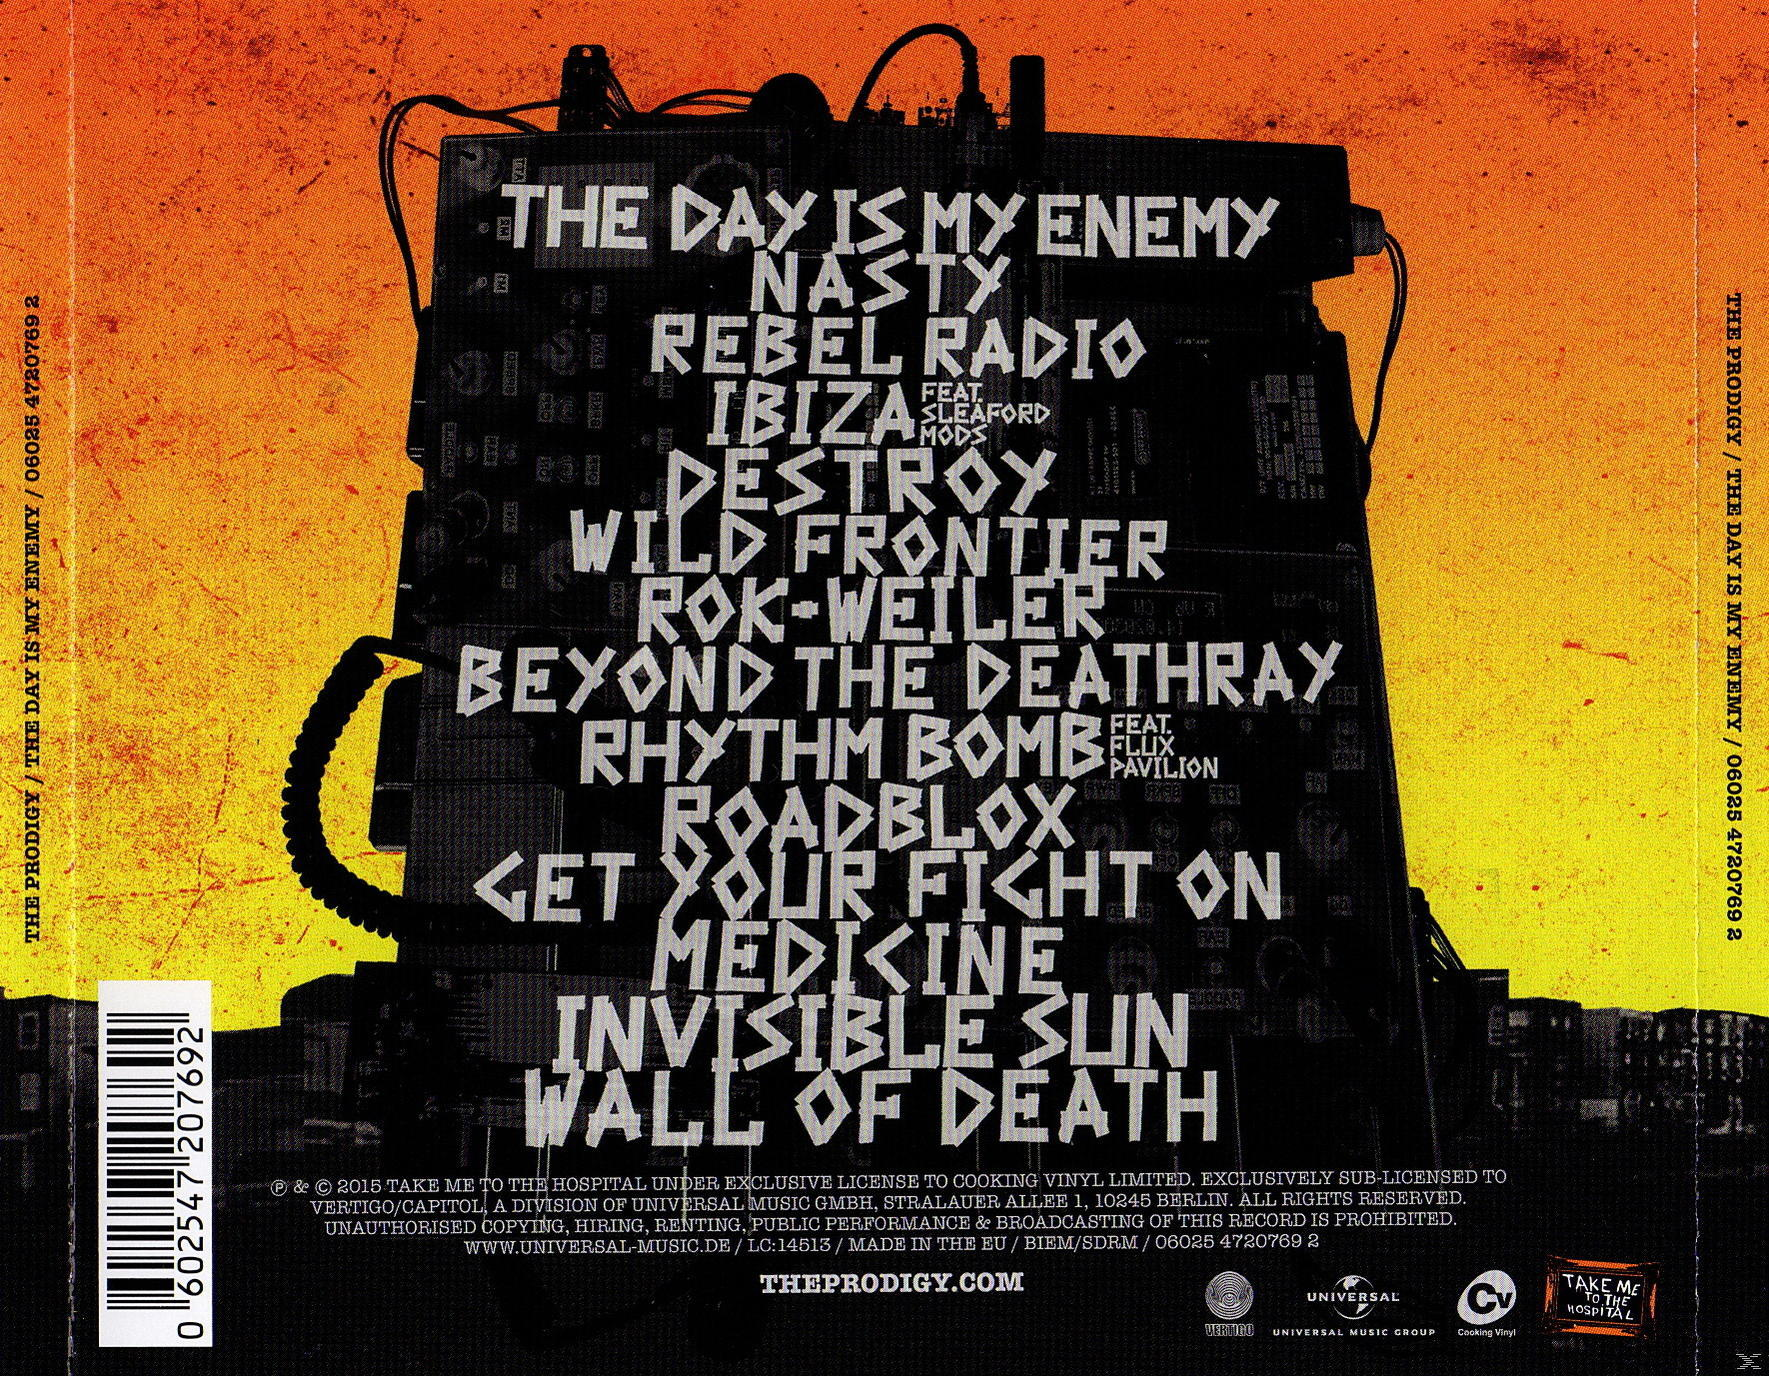 (CD) My Day - Is Prodigy Enemy The - The